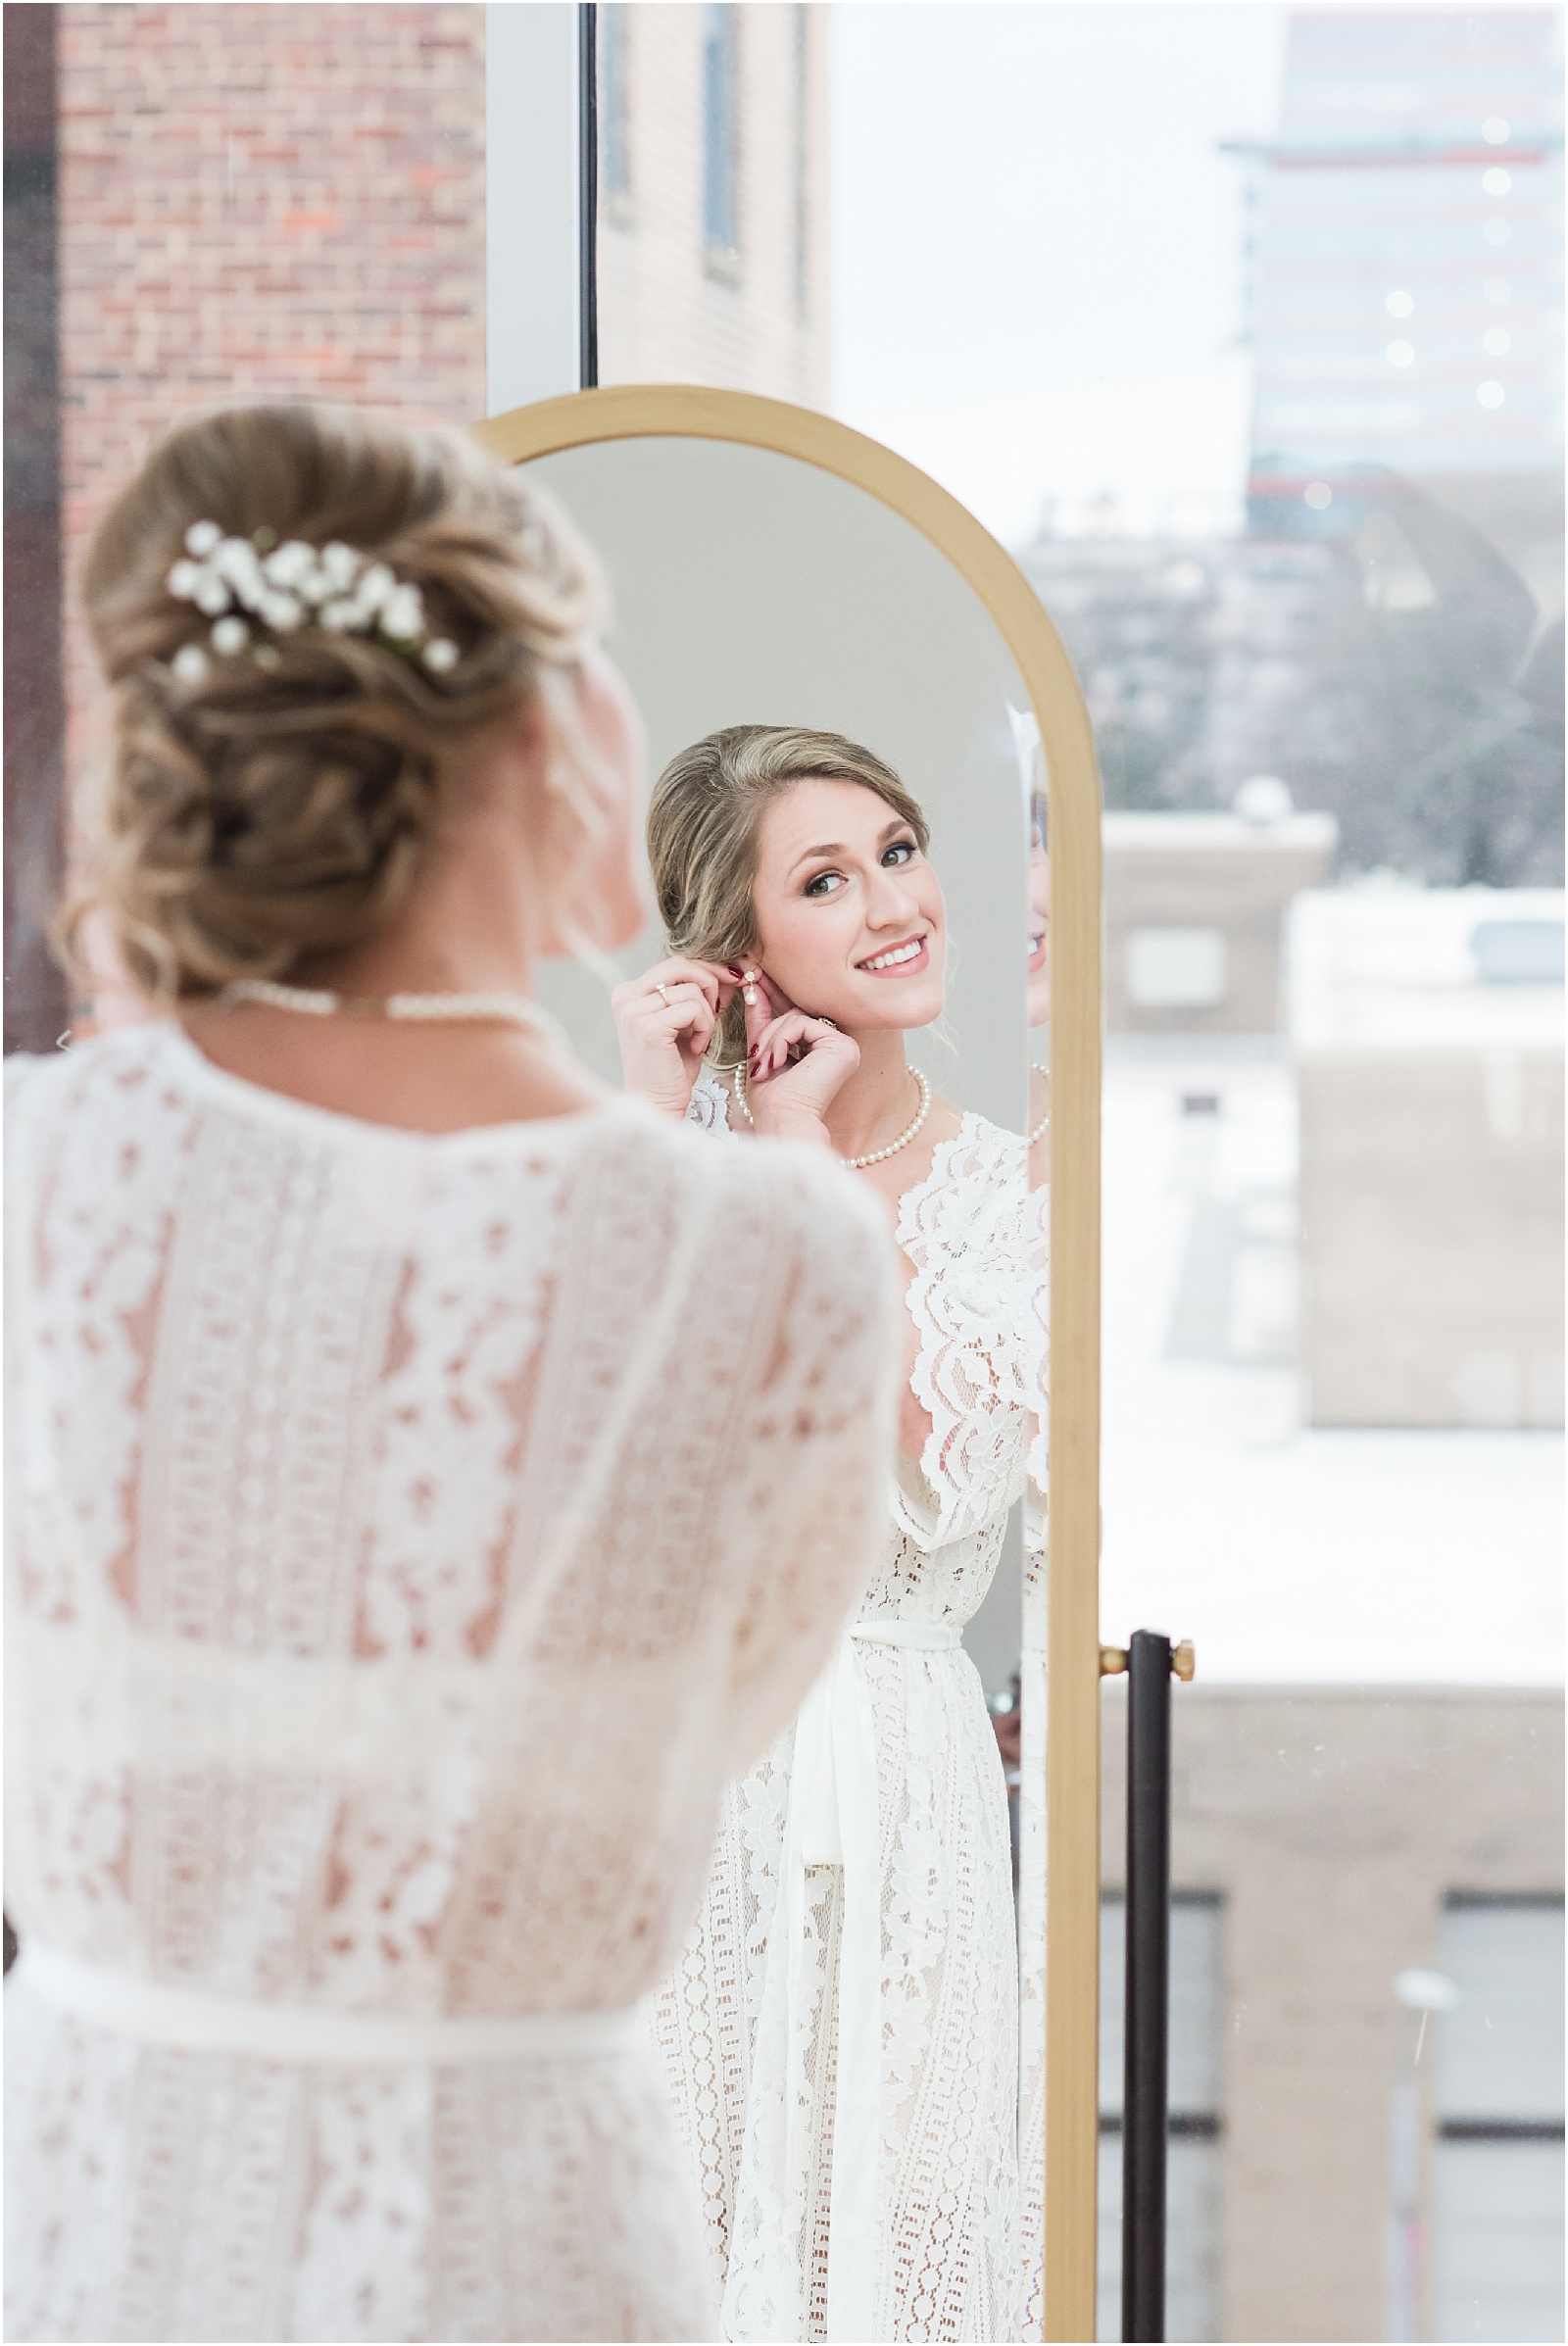 Bride adjusting earings looking into mirror at the glass box